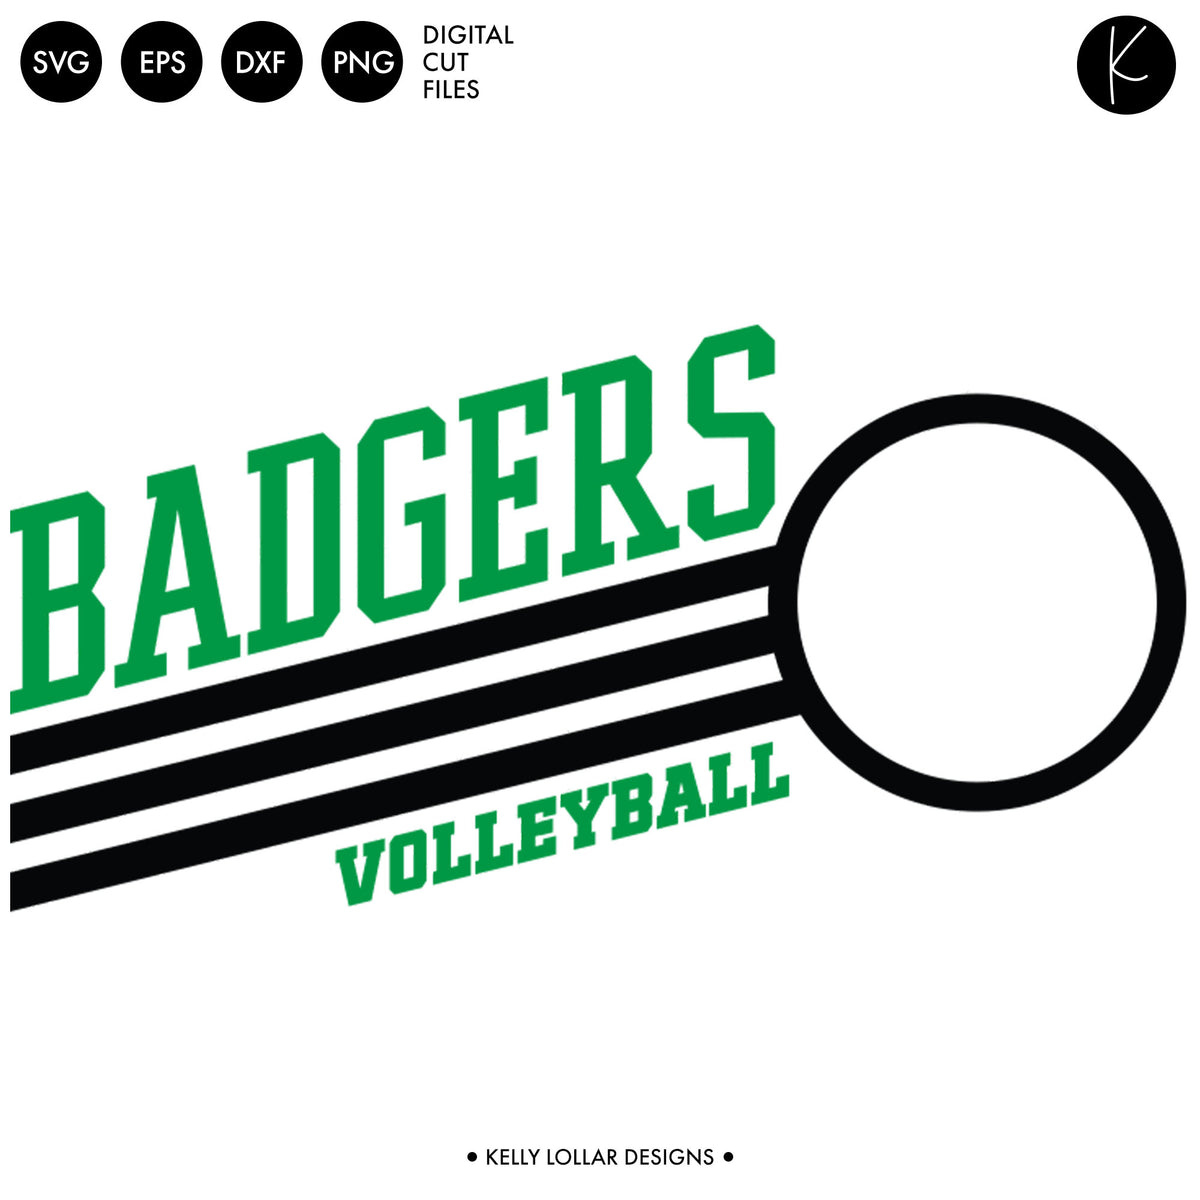 Badgers Volleyball Bundle | SVG DXF EPS PNG Cut Files